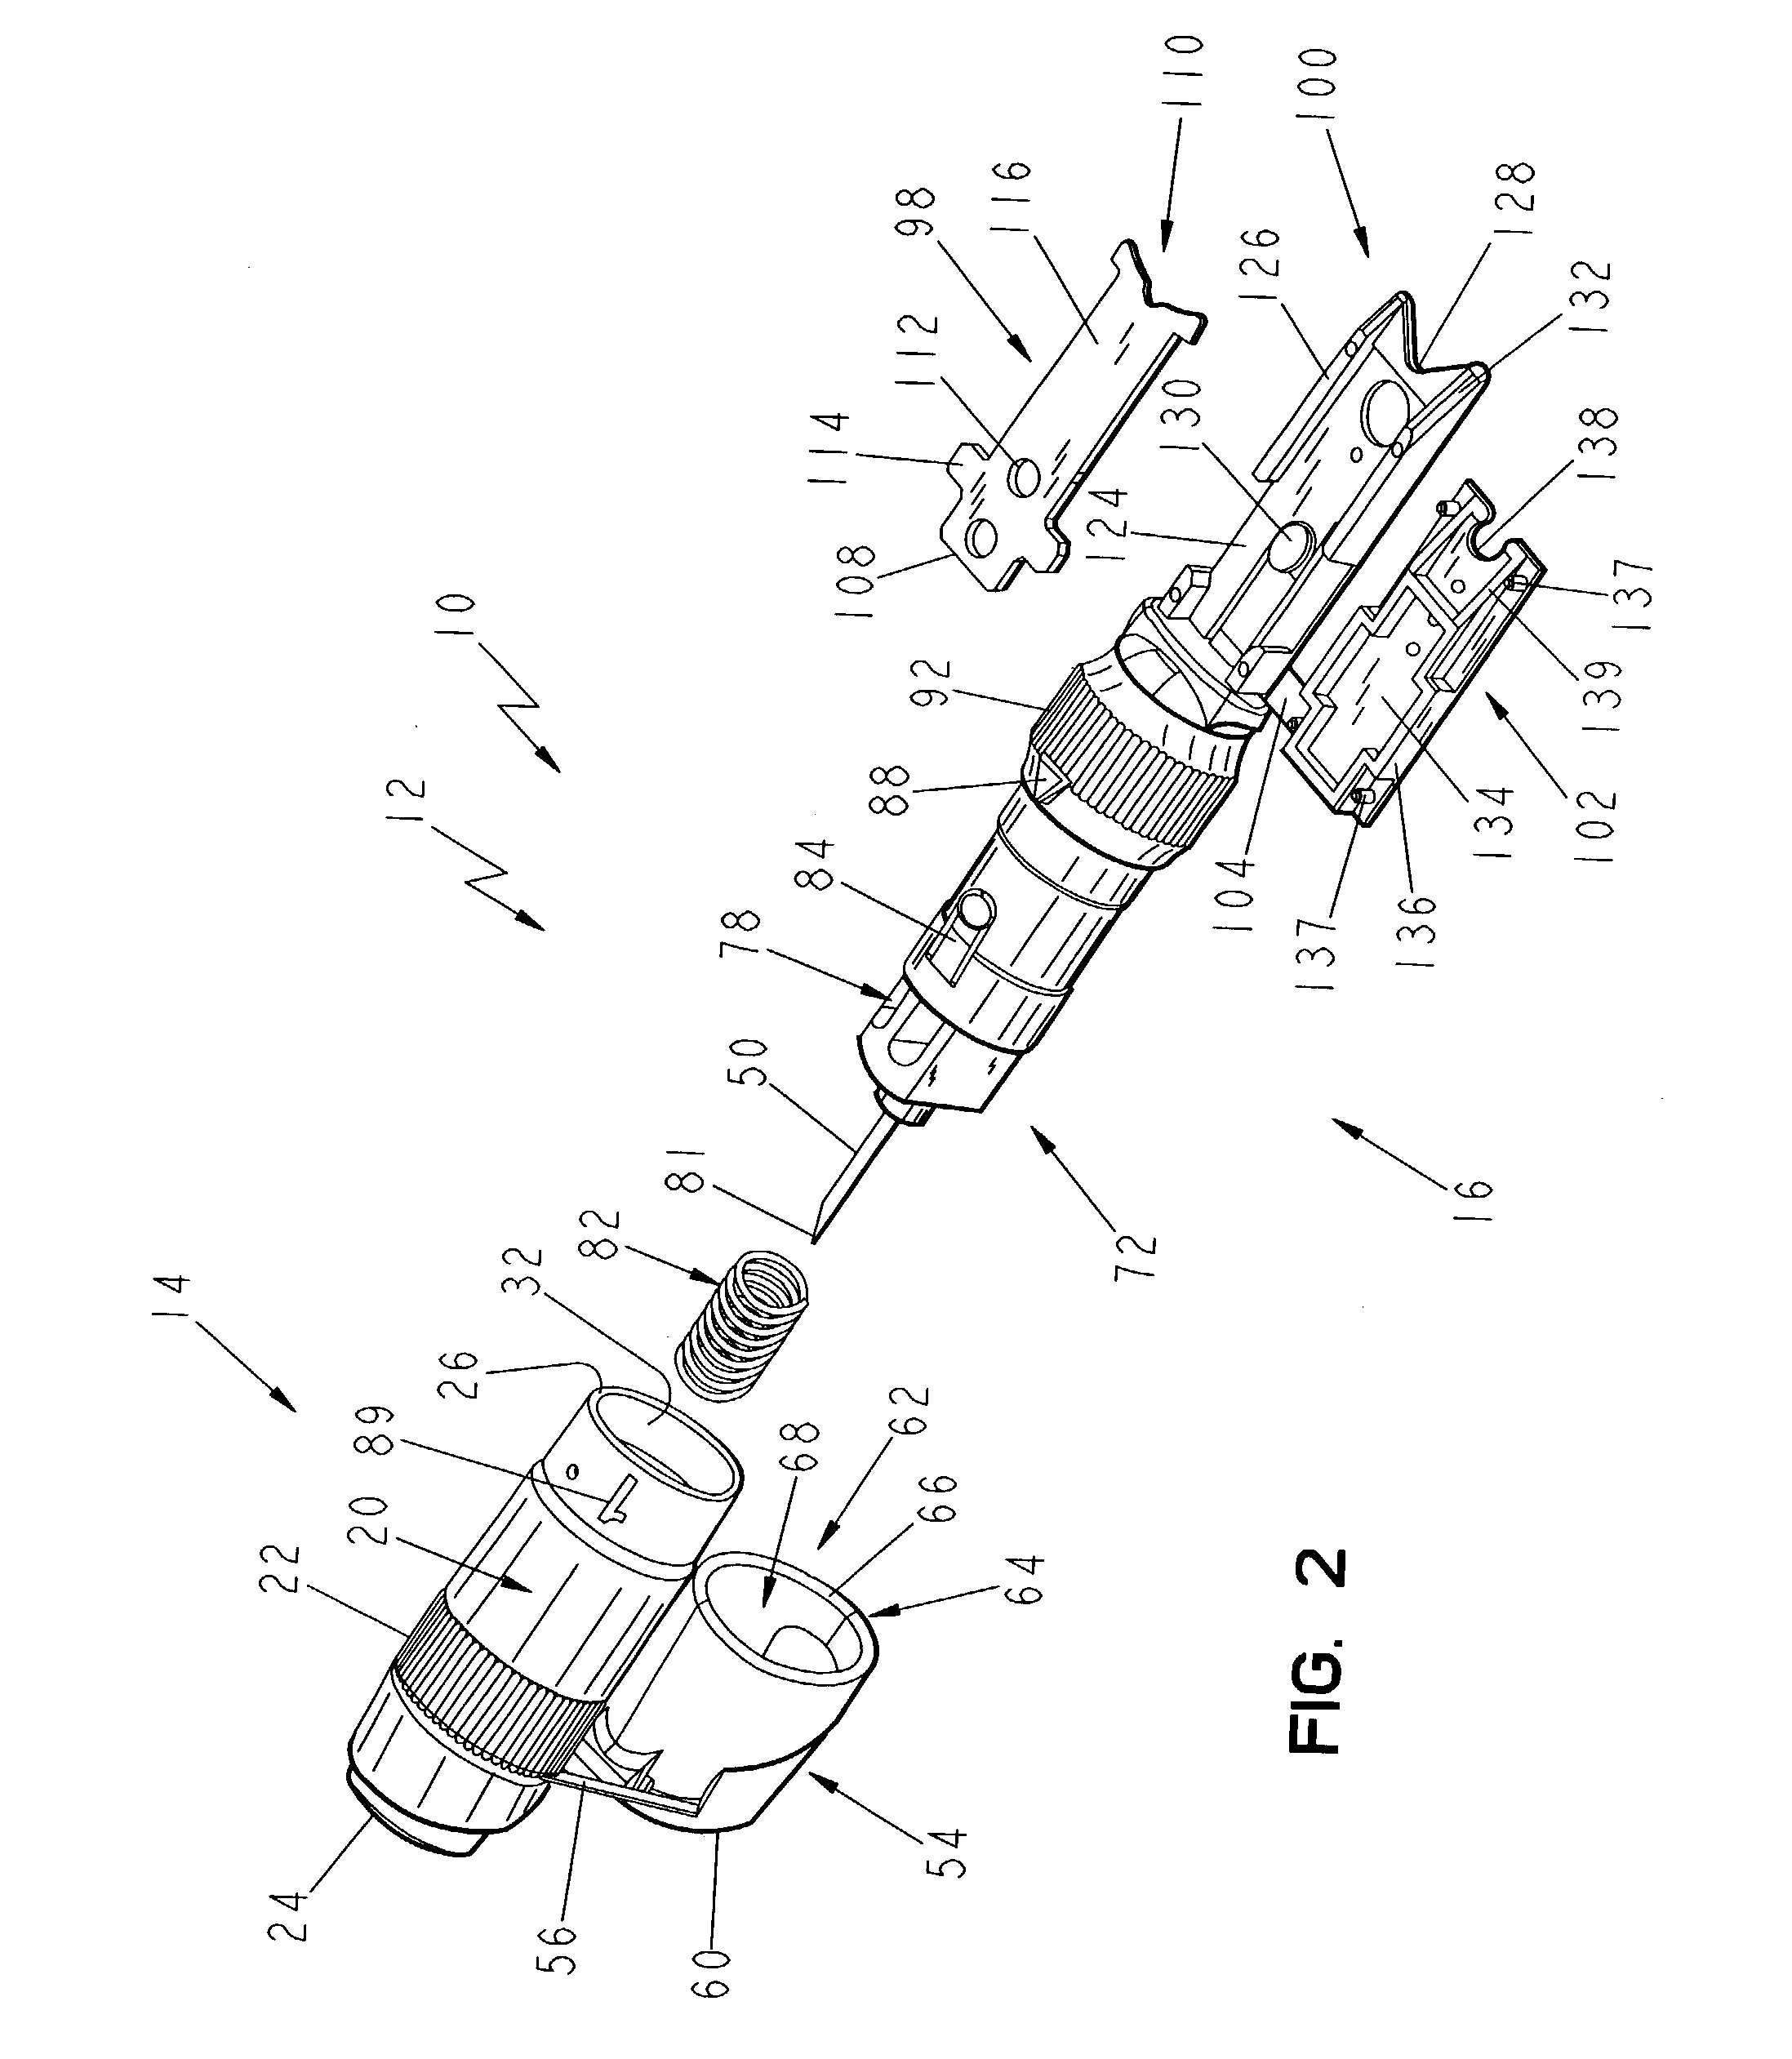 Consolidated body fluid testing device and method